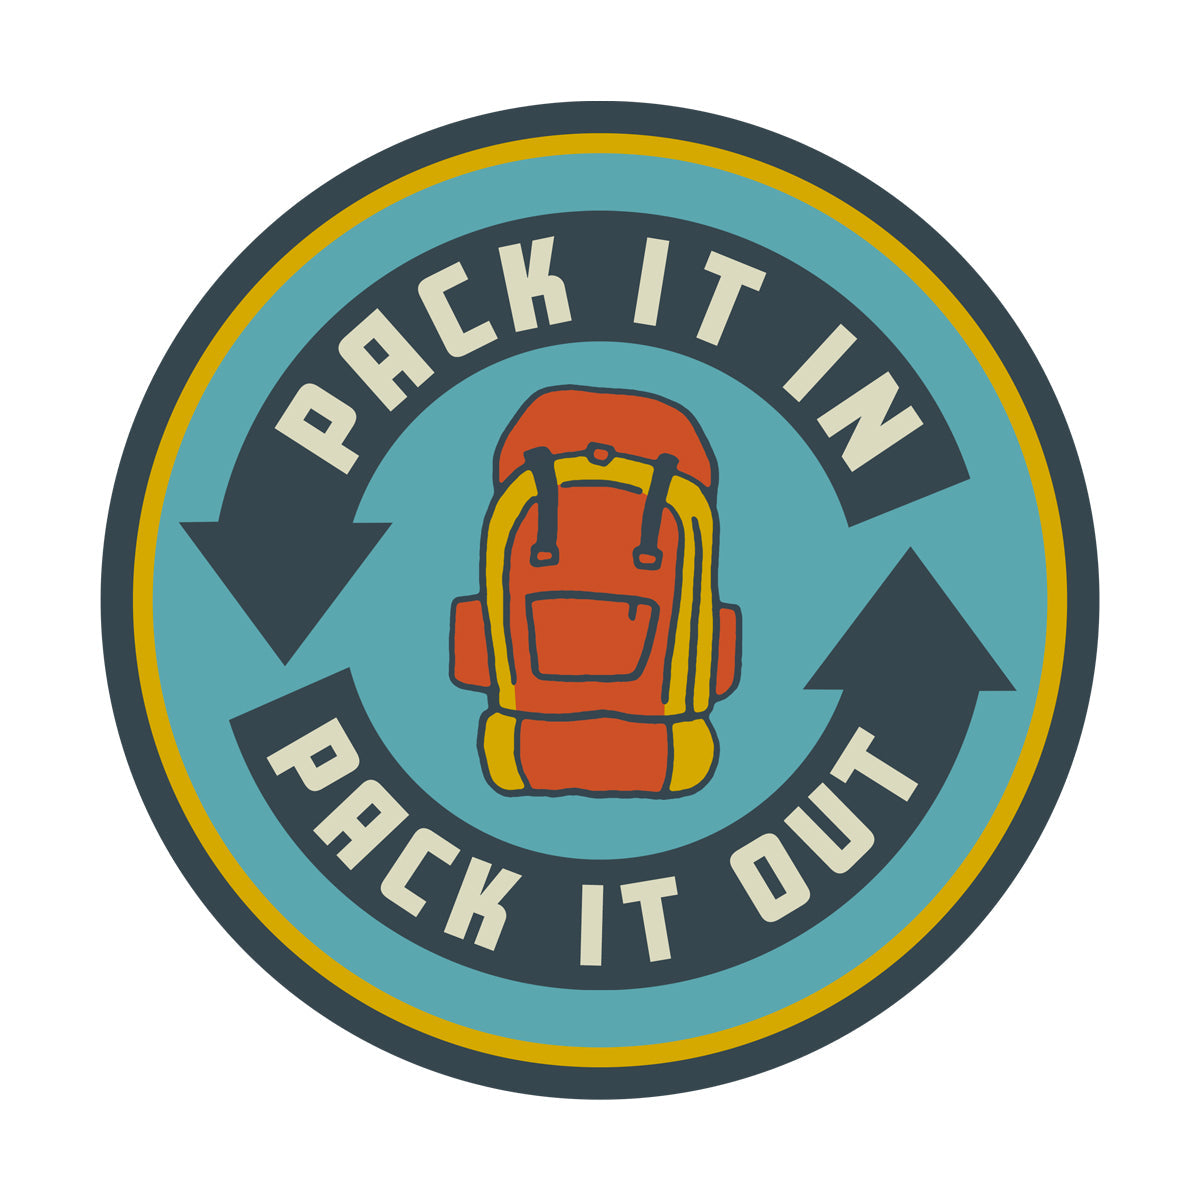 TNSP - Pack It In, Pack It Out Patch